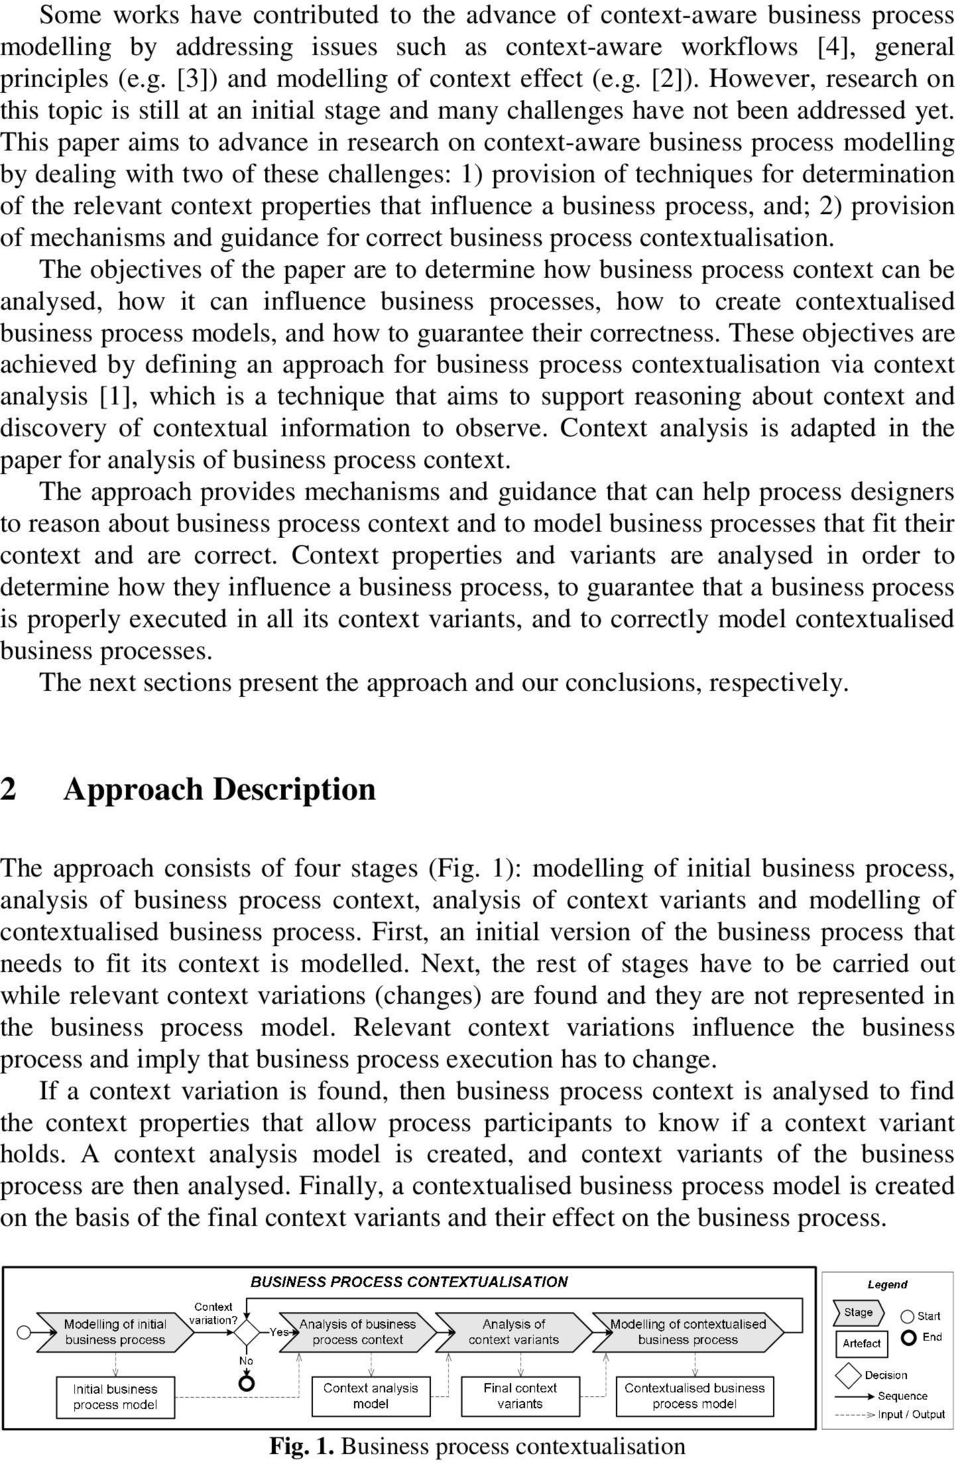 This paper aims to advance in research on context-aware business process modelling by dealing with two of these challenges: 1) provision of techniques for determination of the relevant context